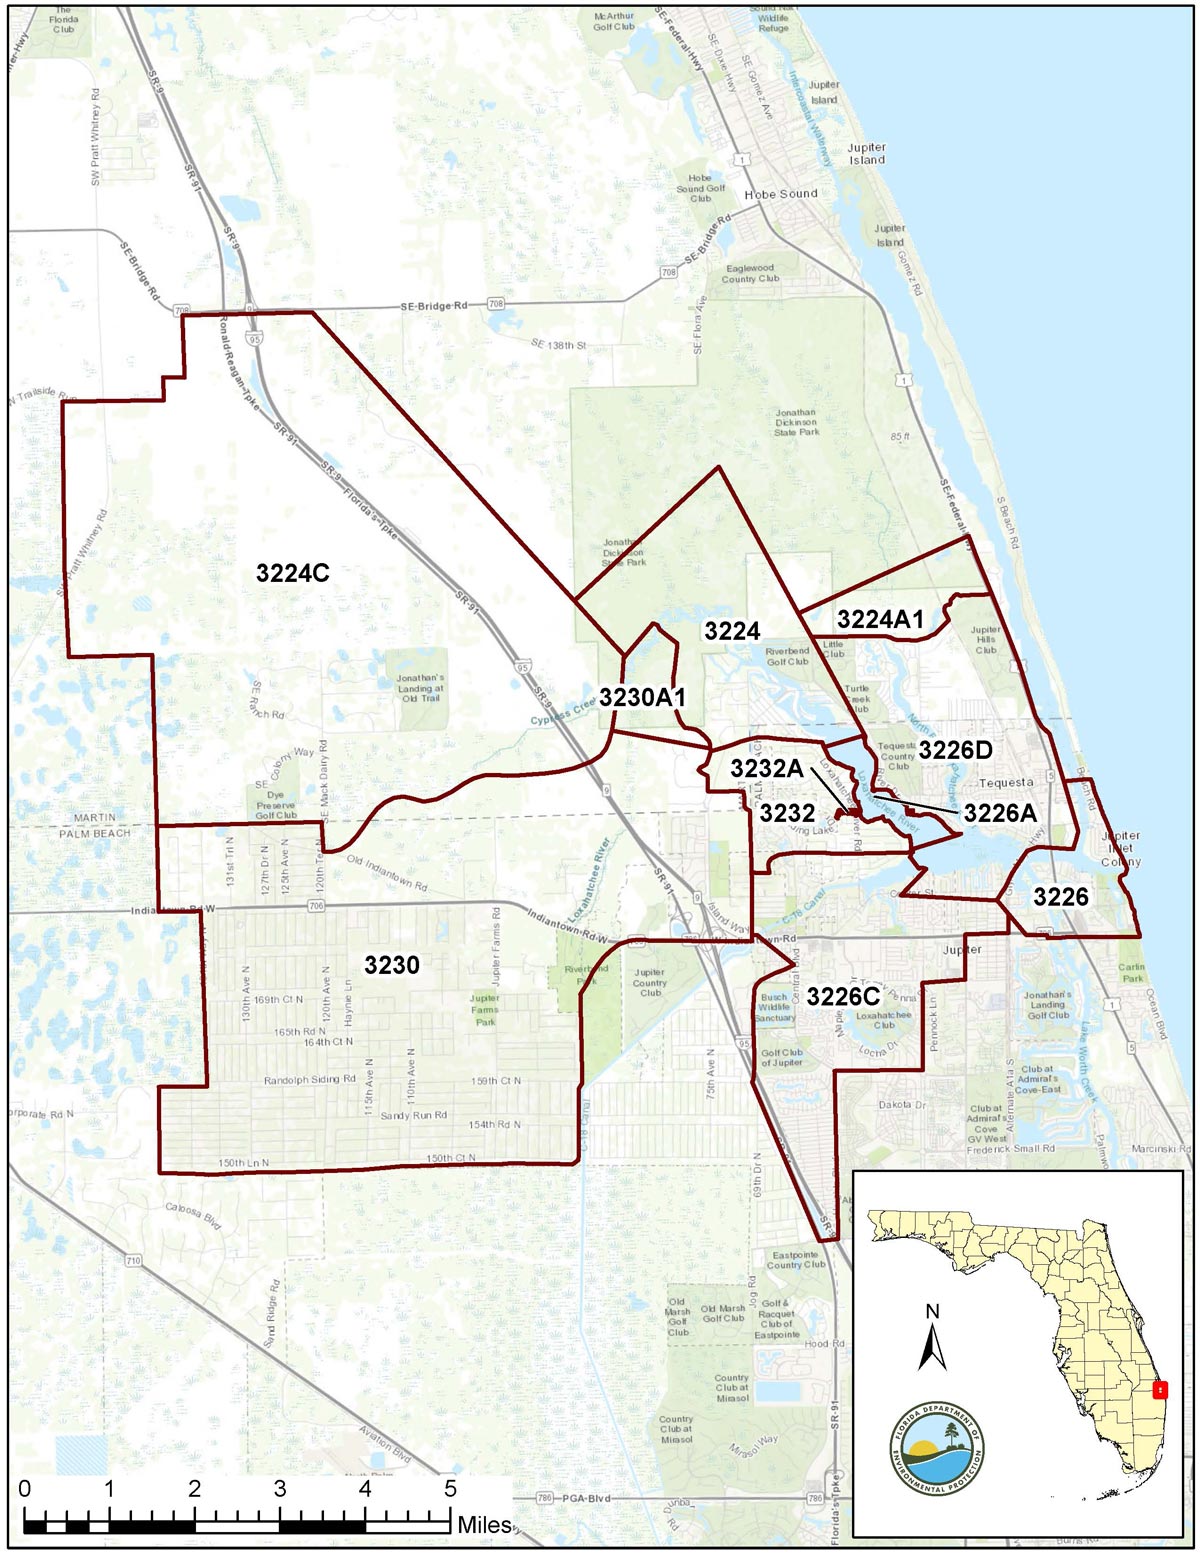 Map of WBID boundaries included in the St. Lucie and Loxahatchee alternative restoration plan under development.